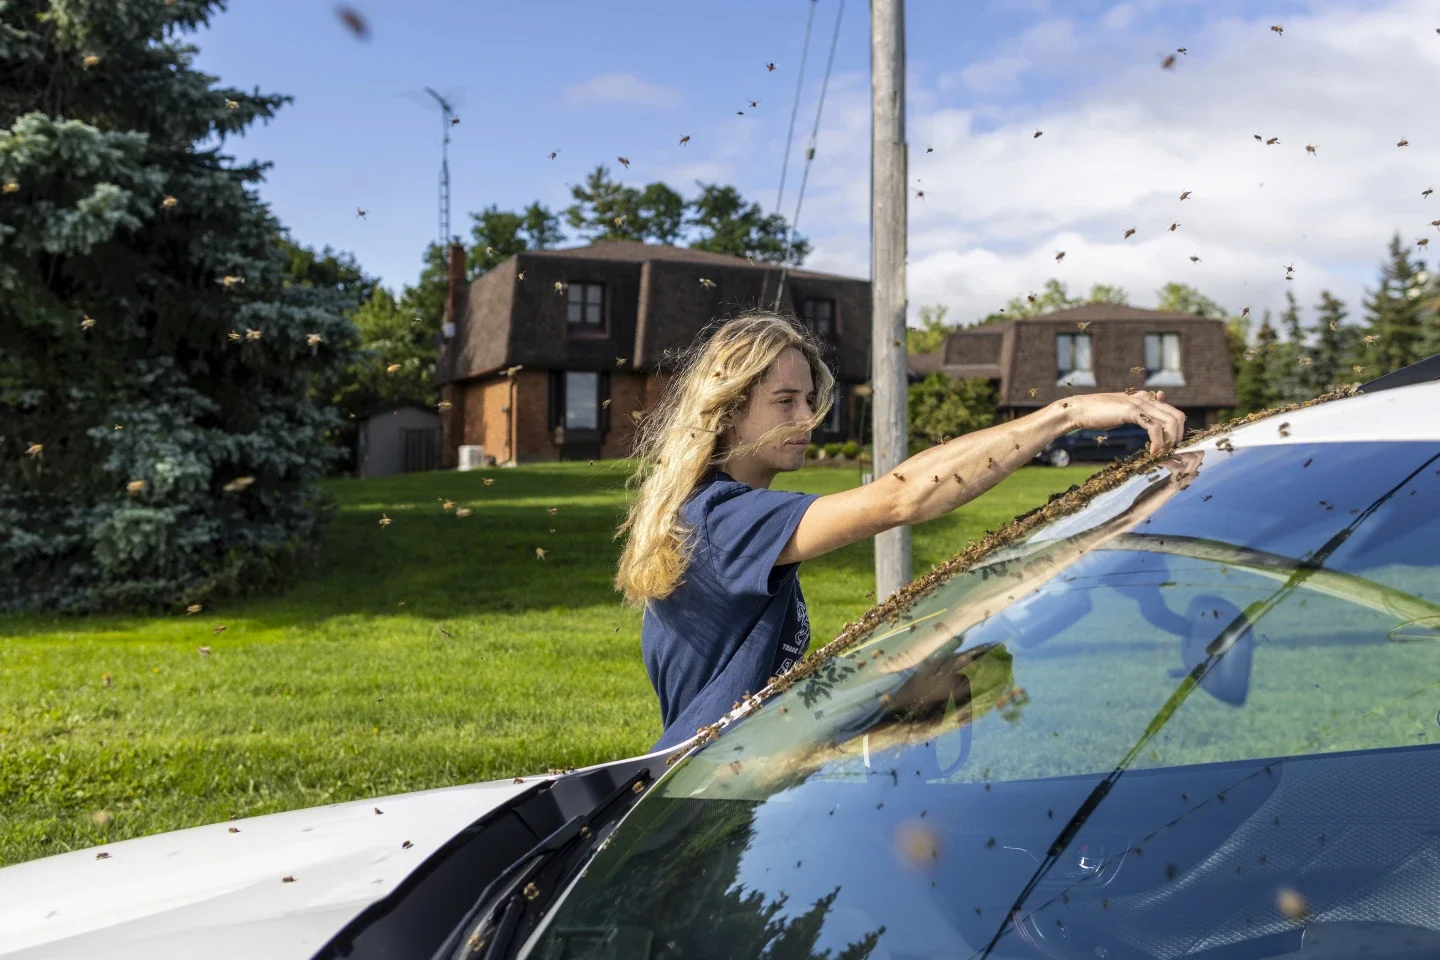 Woman removes bees from a car windhshield by hand.